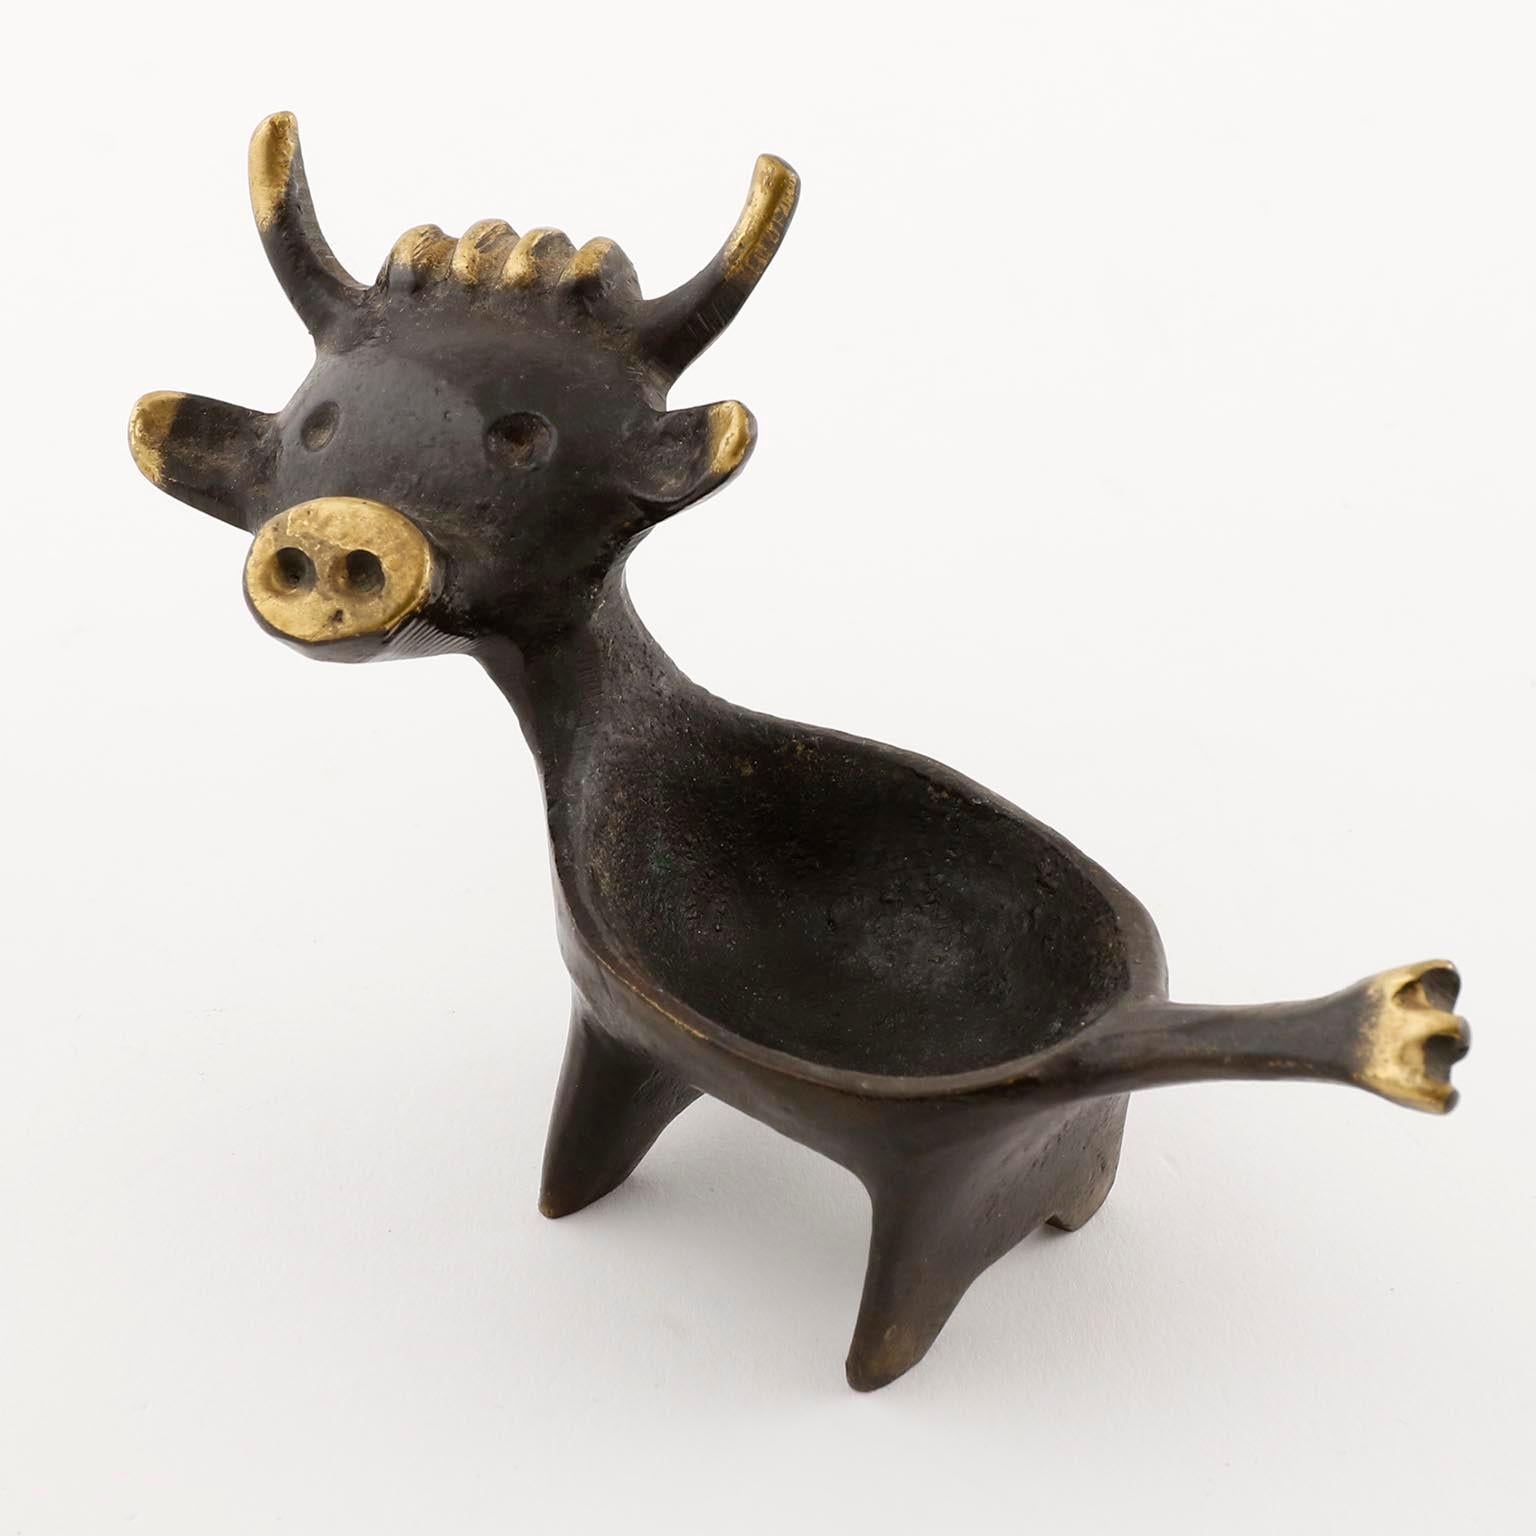 A candleholder in the form of a cow by Walter Bosse and manufactured by Hertha Baller, Austria, Vienna, in midcentury, circa 1960 (late 1950s or early 1960s).
The candleholder is made of blackened and polished brass. It can be used for small ball